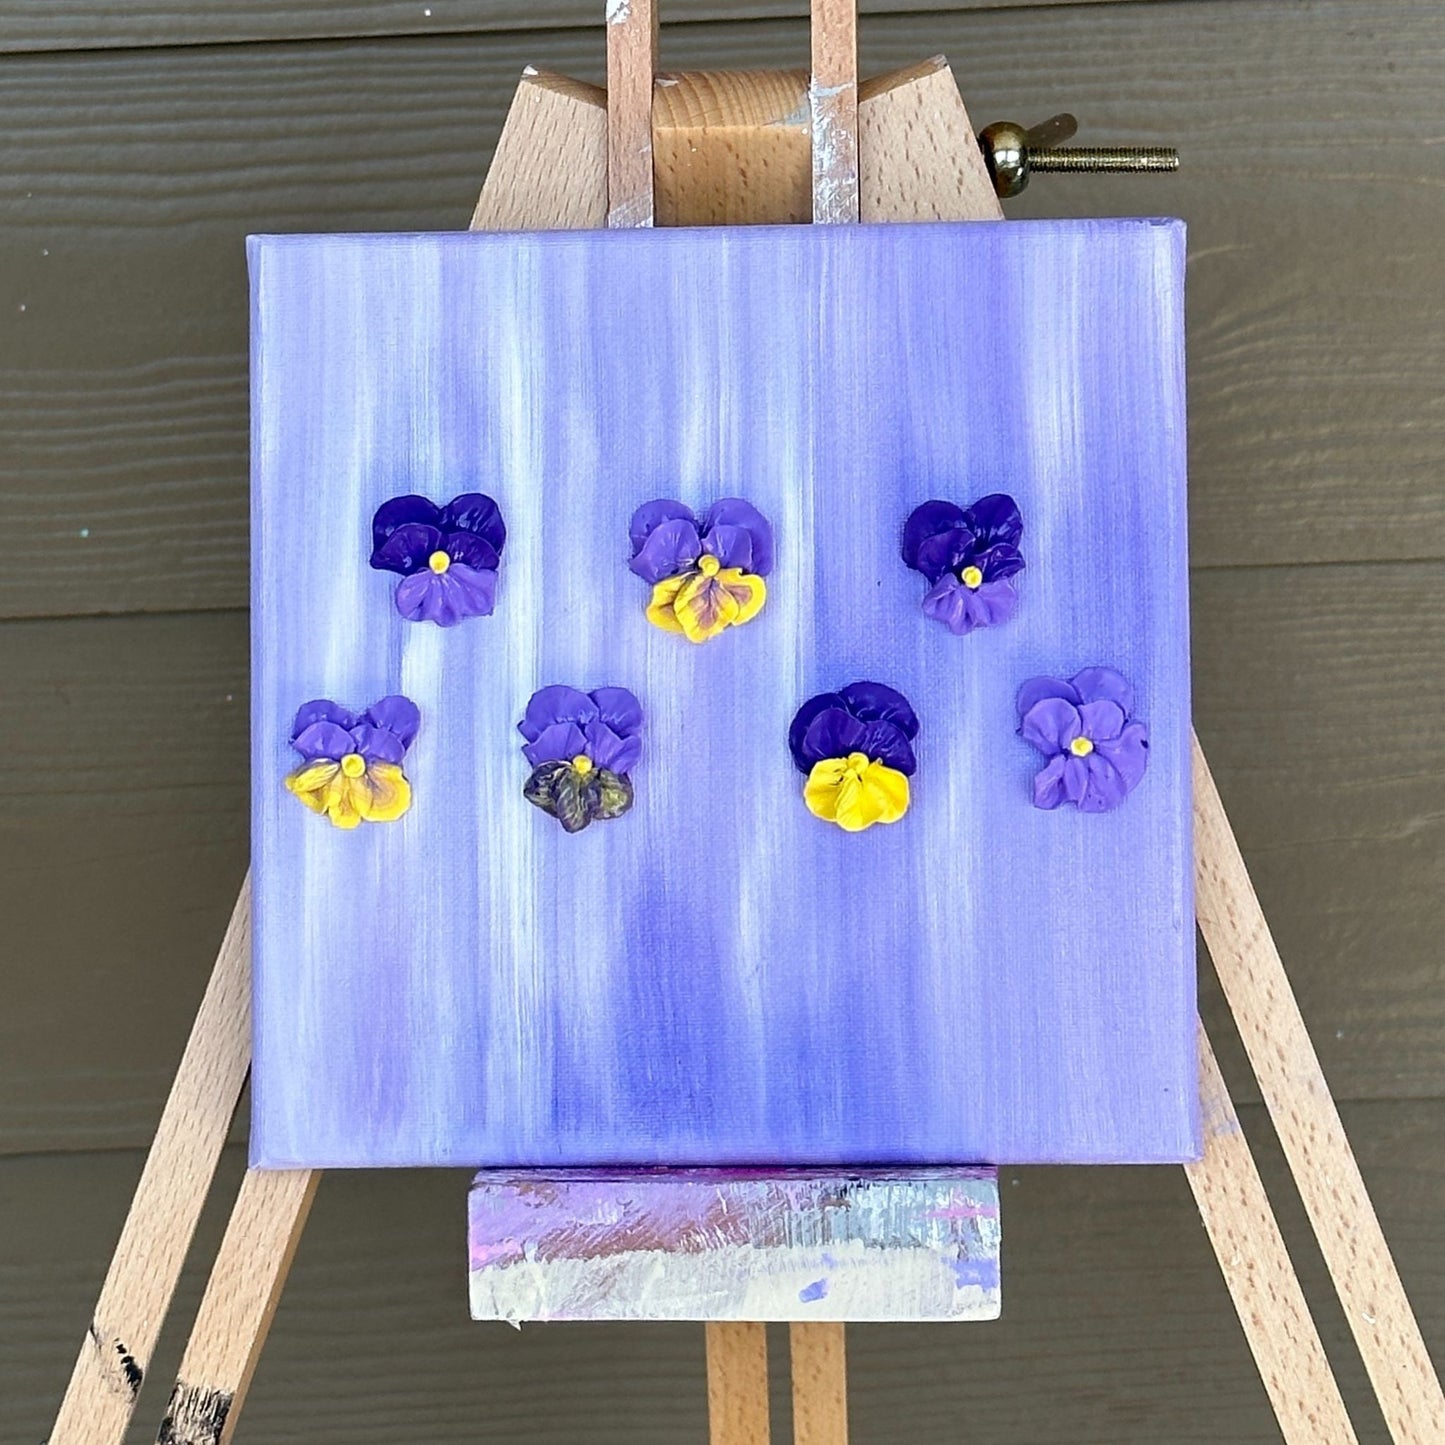 3D Purple and Yellow Pansy Flowers on Light Purple background 8"x8"